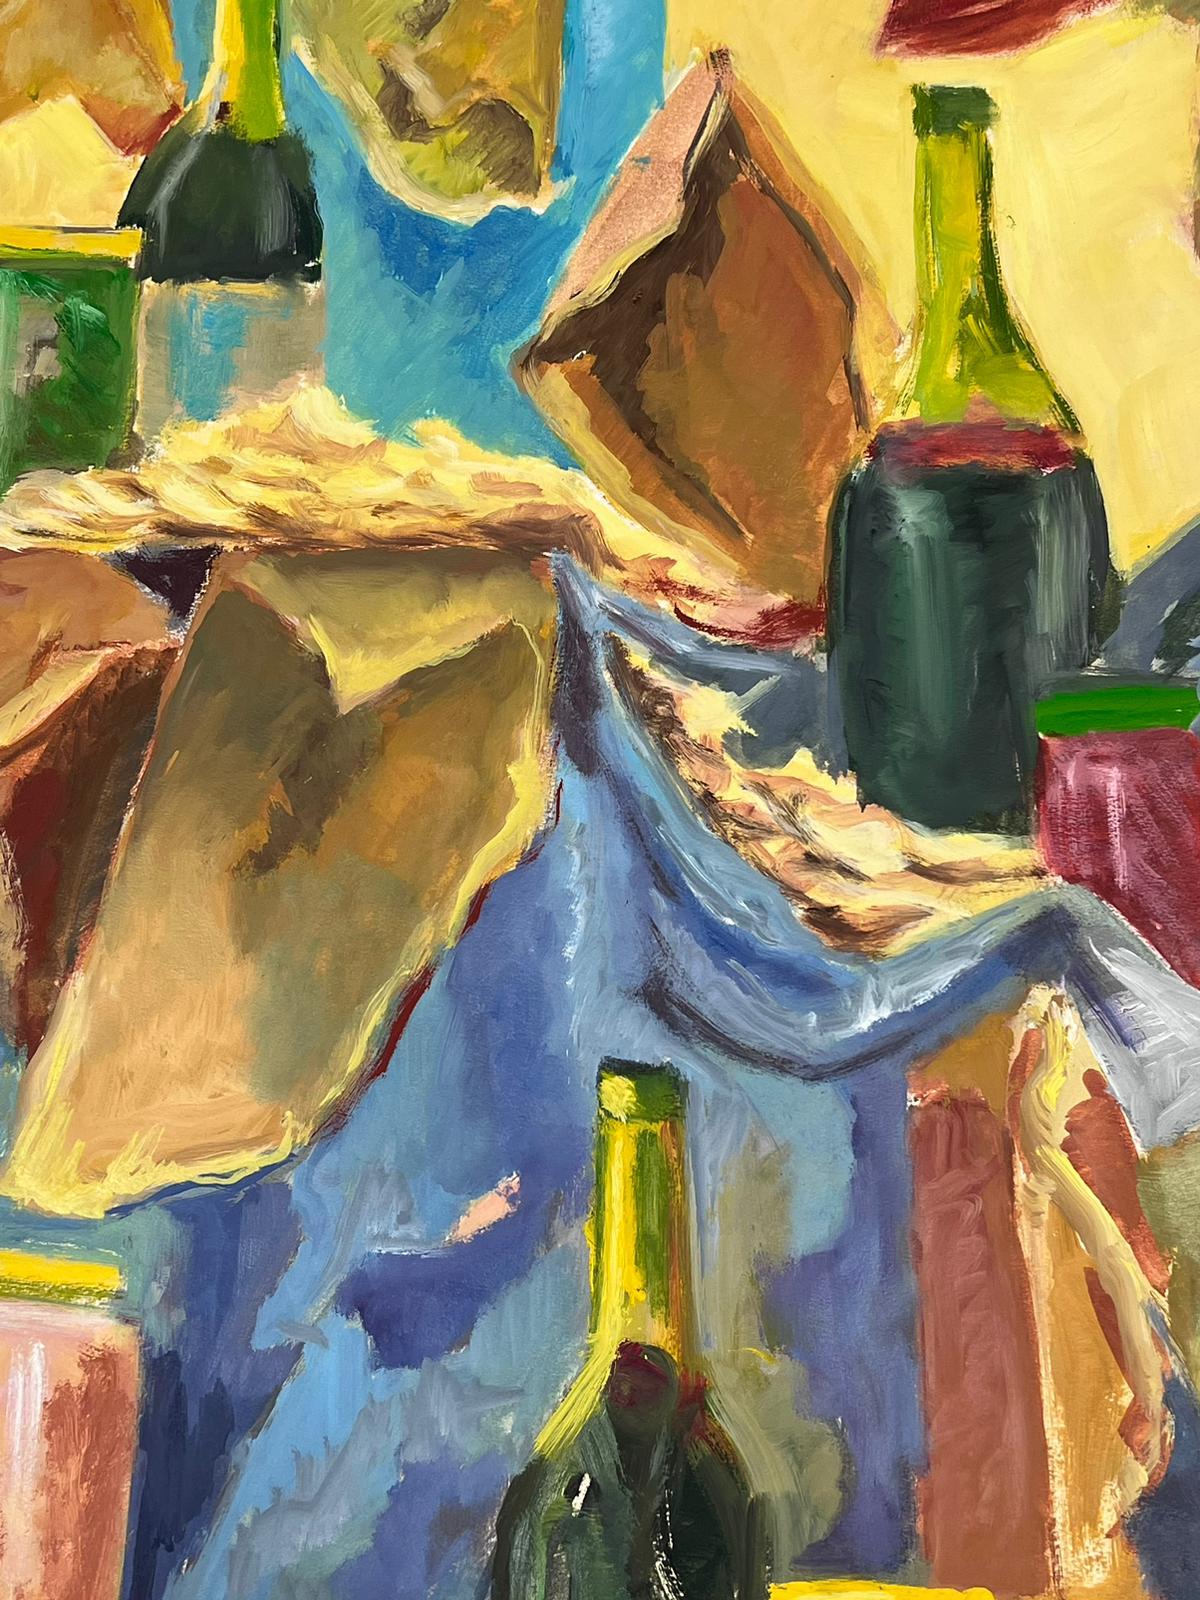 Champagne Bottles 1970's French Still Life Modernist Painting For Sale 2